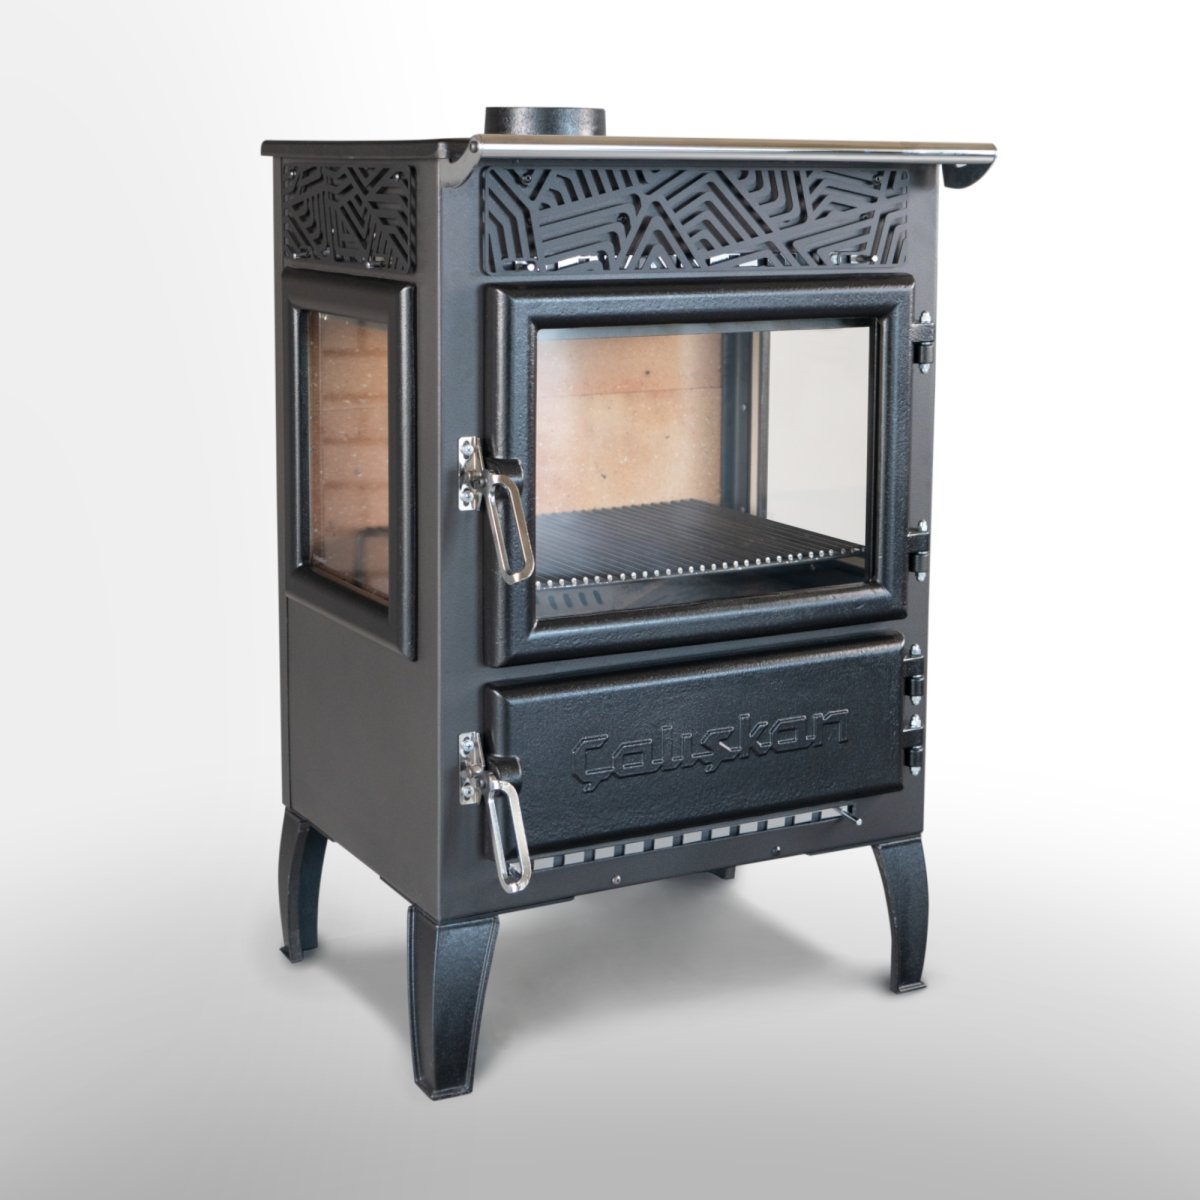 44,193 Wood Burning Stove Images, Stock Photos, 3D objects